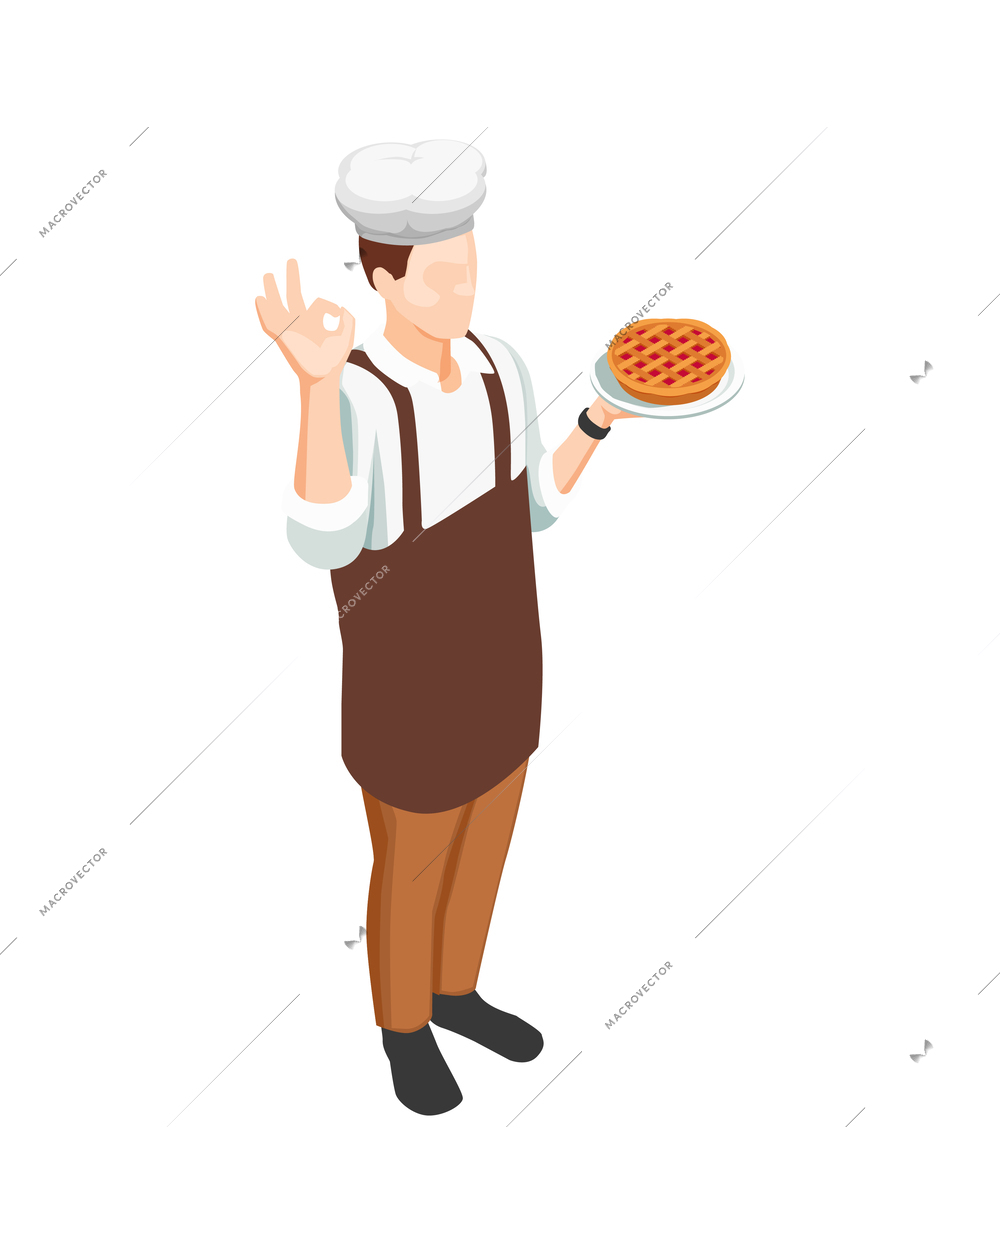 Male character of confectioner holding plate with baked fruit pie isometric icon 3d vector illustration